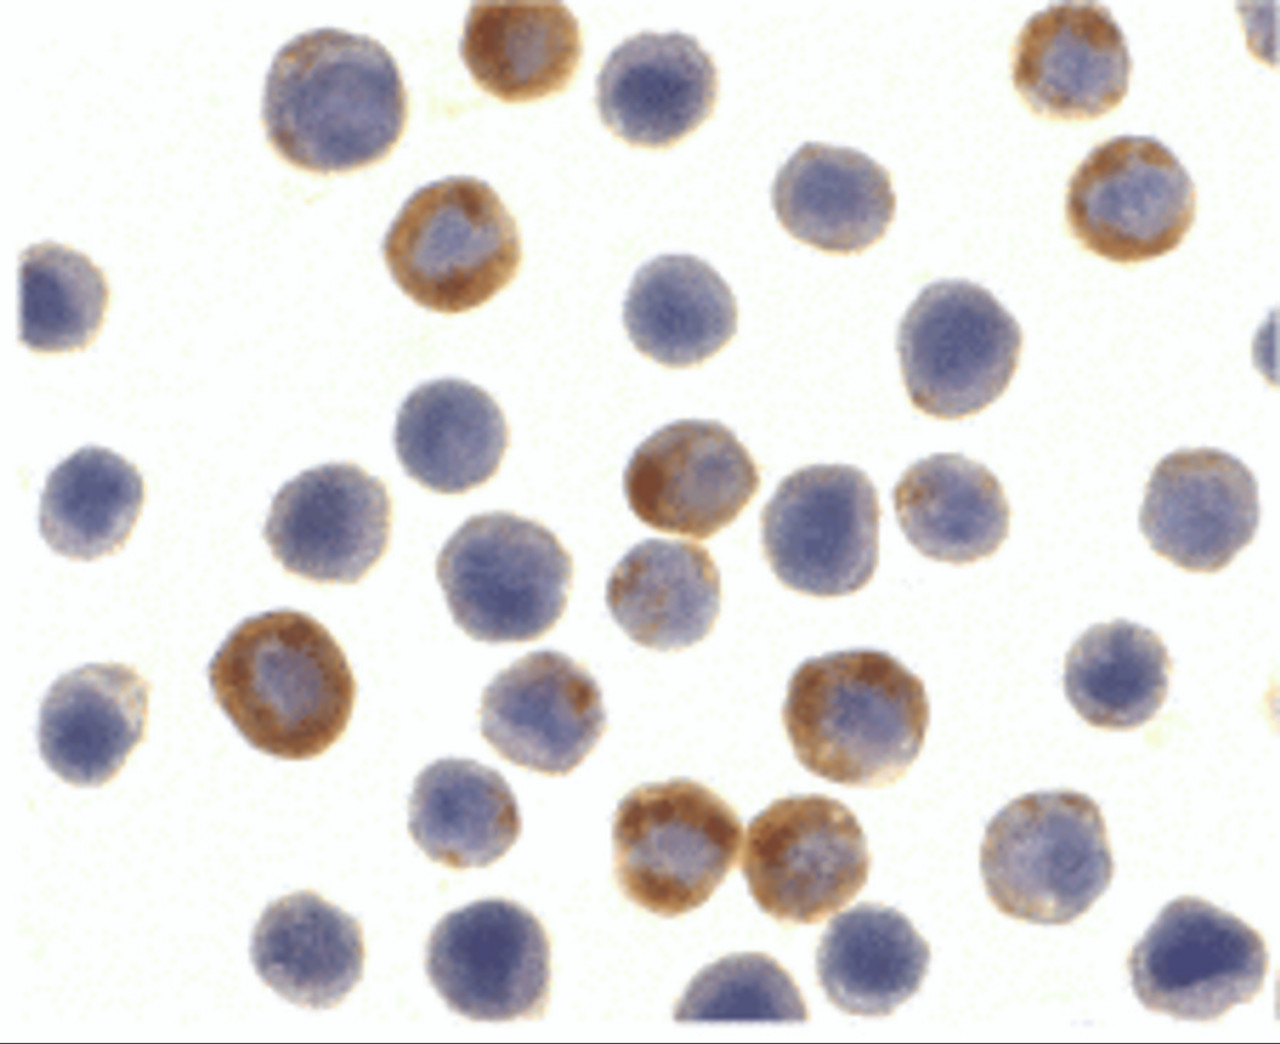 Immunocytochemistry of ILP-2 in HepG2 cells with ILP-2 antibody at 10 ug/mL.